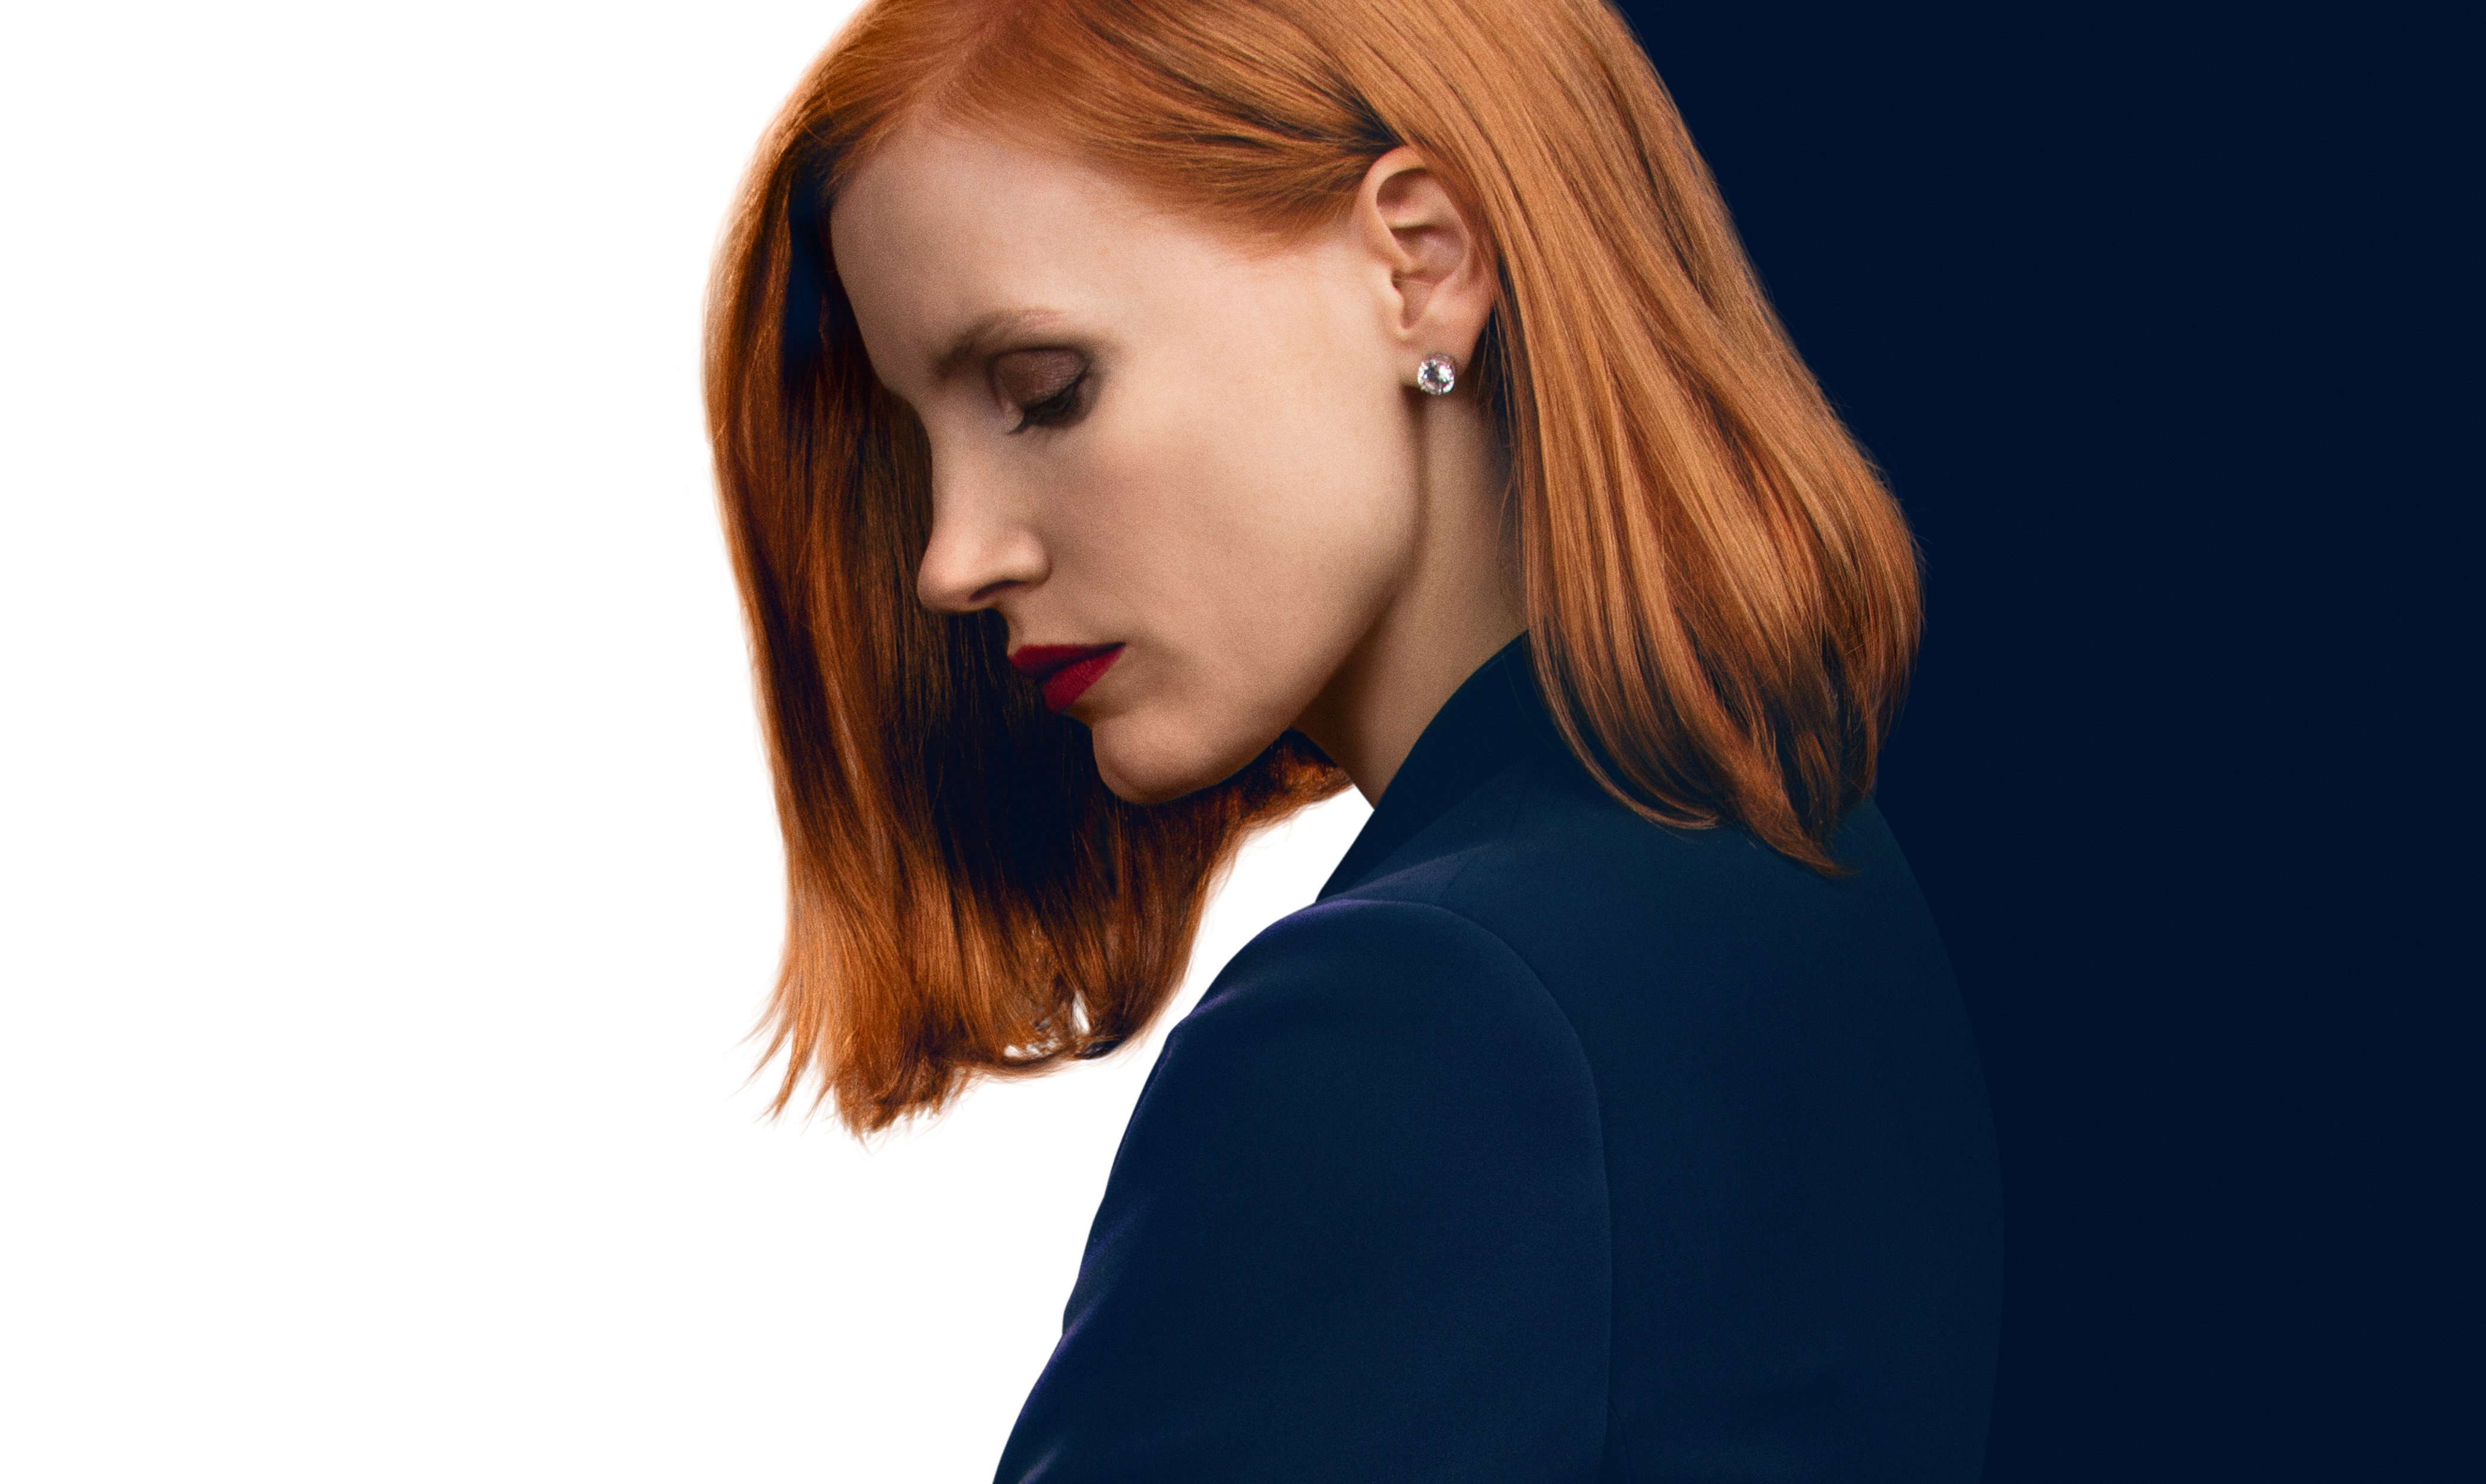 Jessica Chastain 2020 Wallpapers